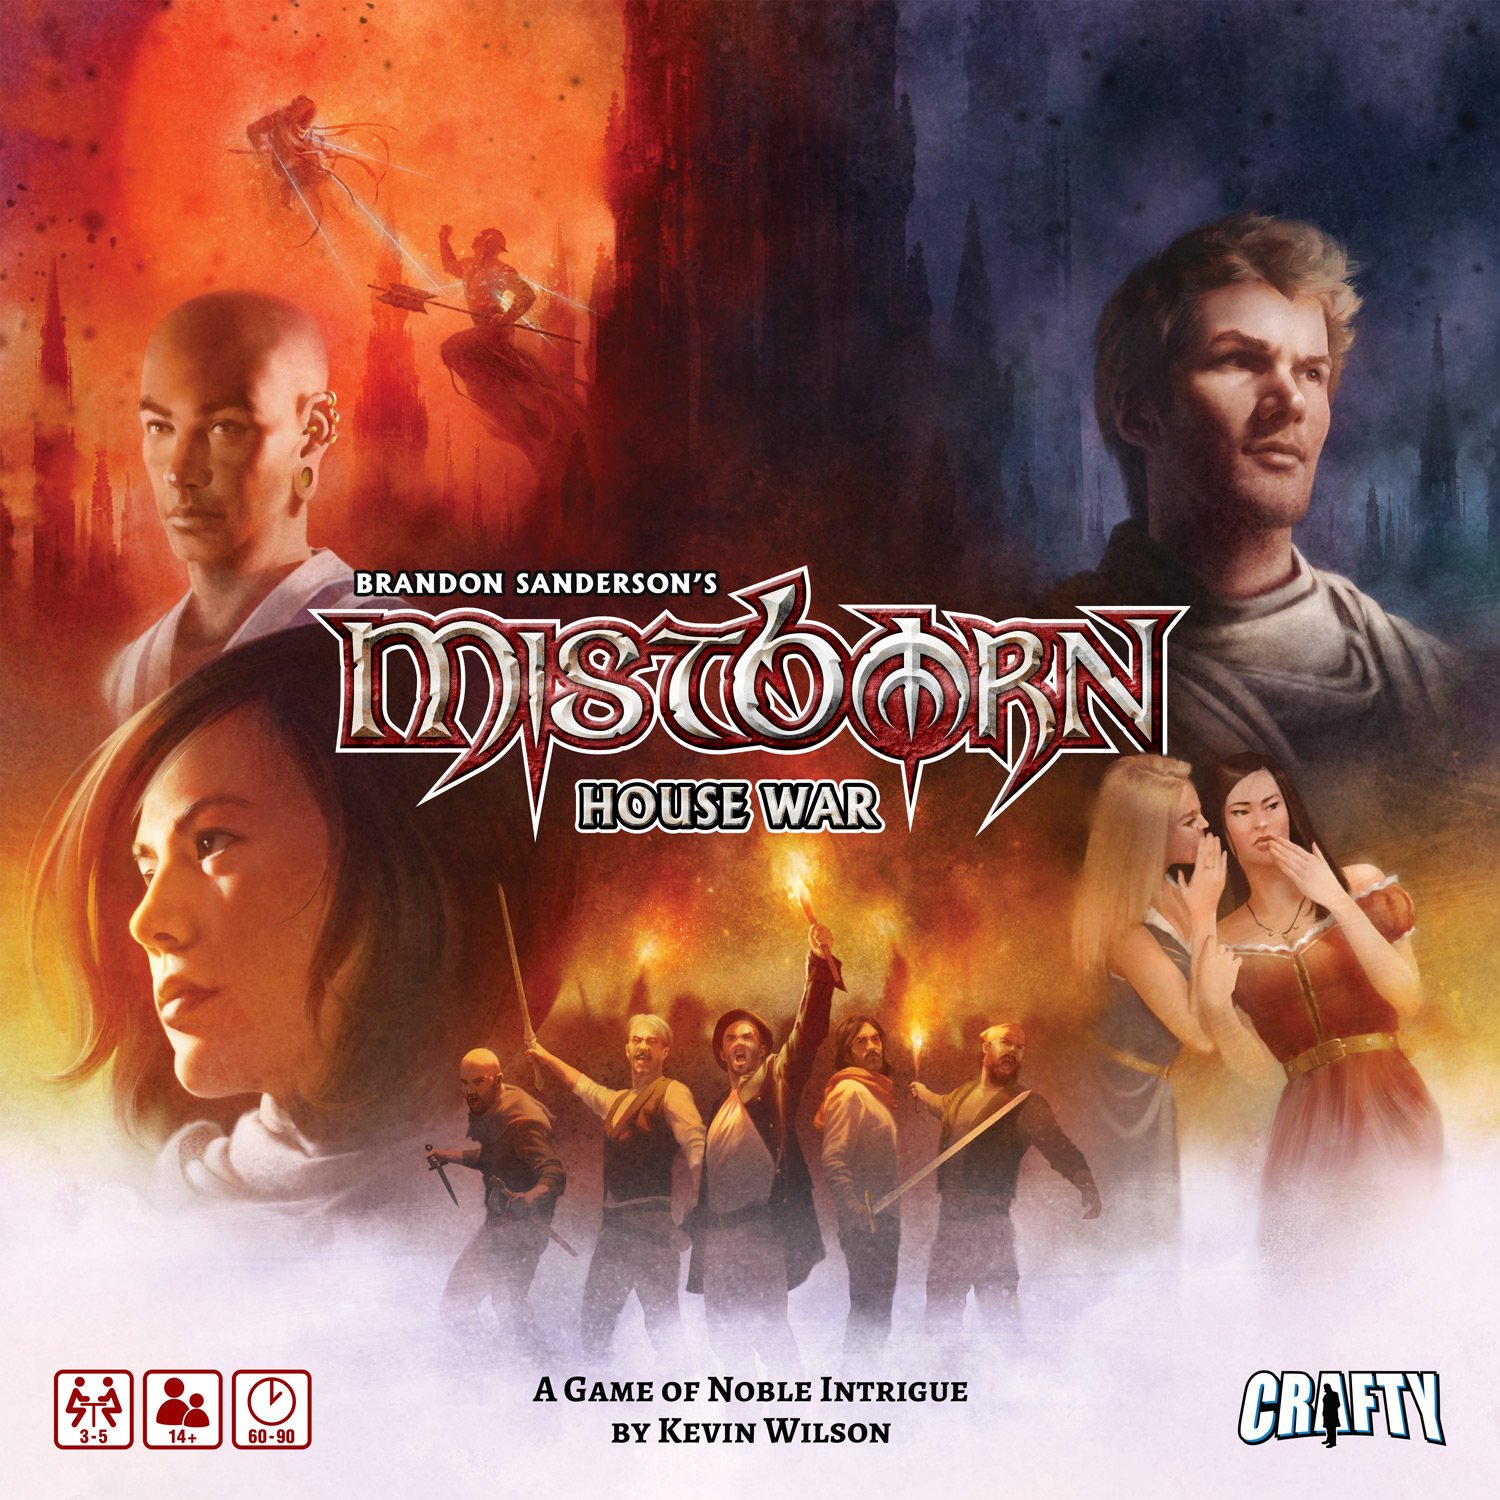 More information about "Mistborn: House War Kickstarter Live and Funded!"